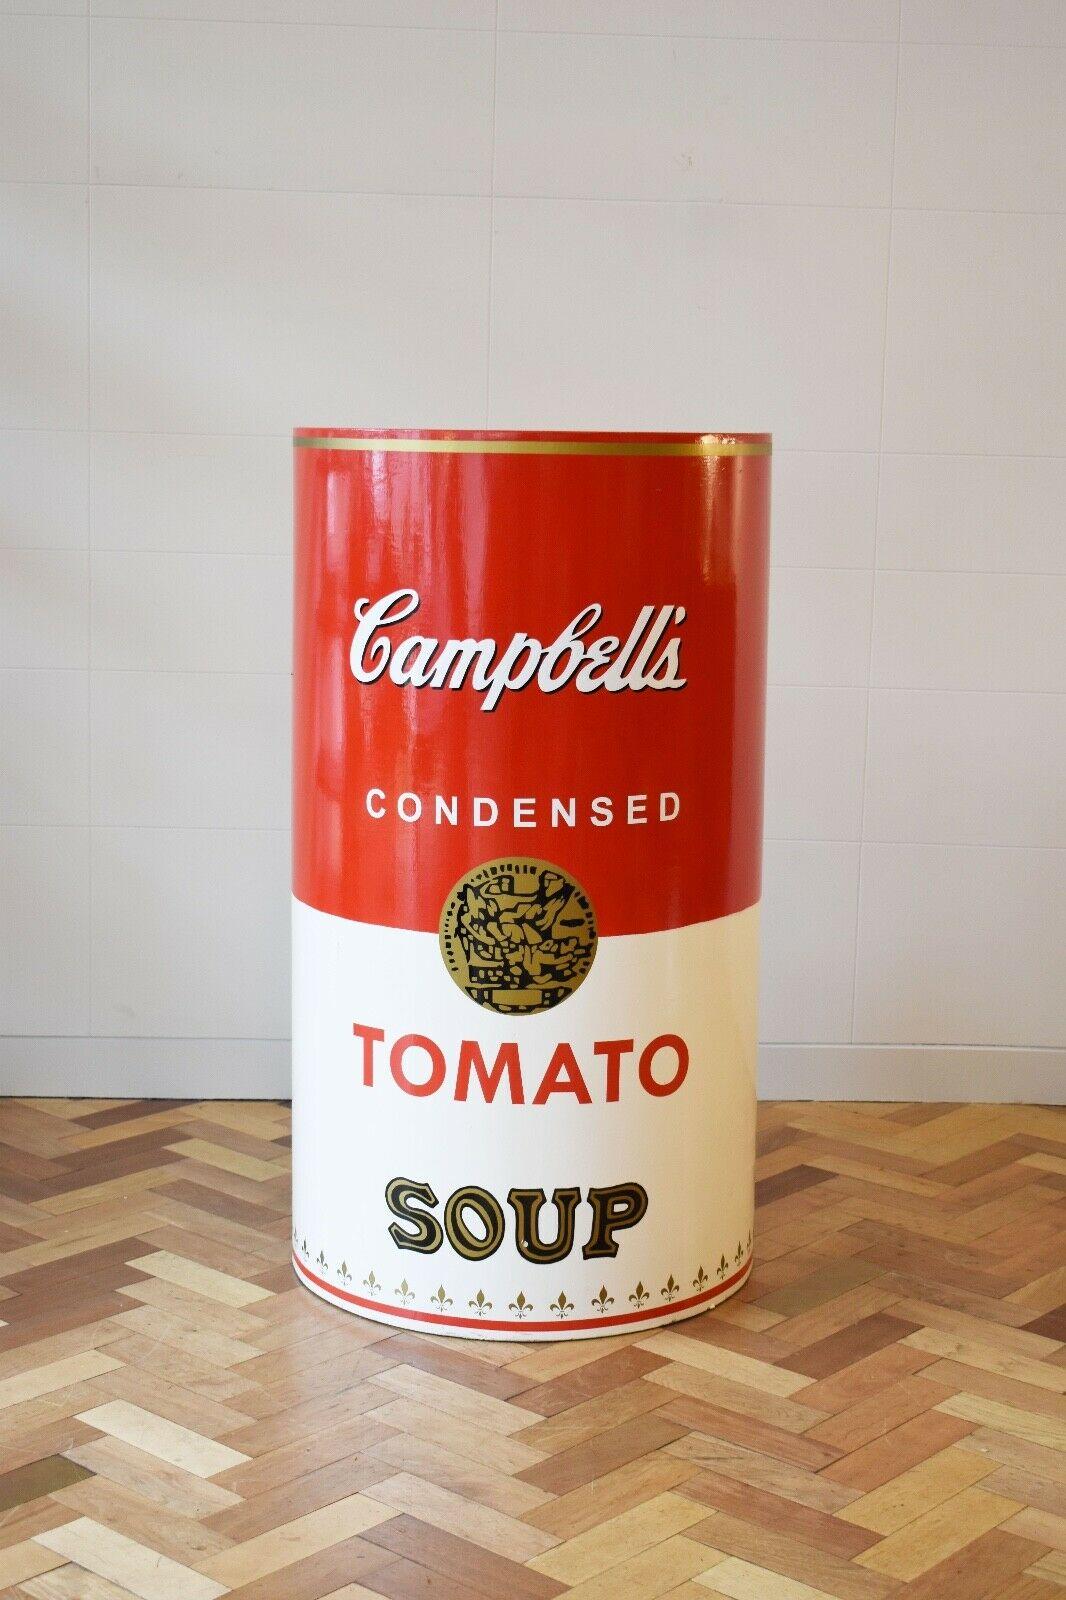 Vintage Campbell Soup Chair Attributed to Andy Warhol Pop Art 1